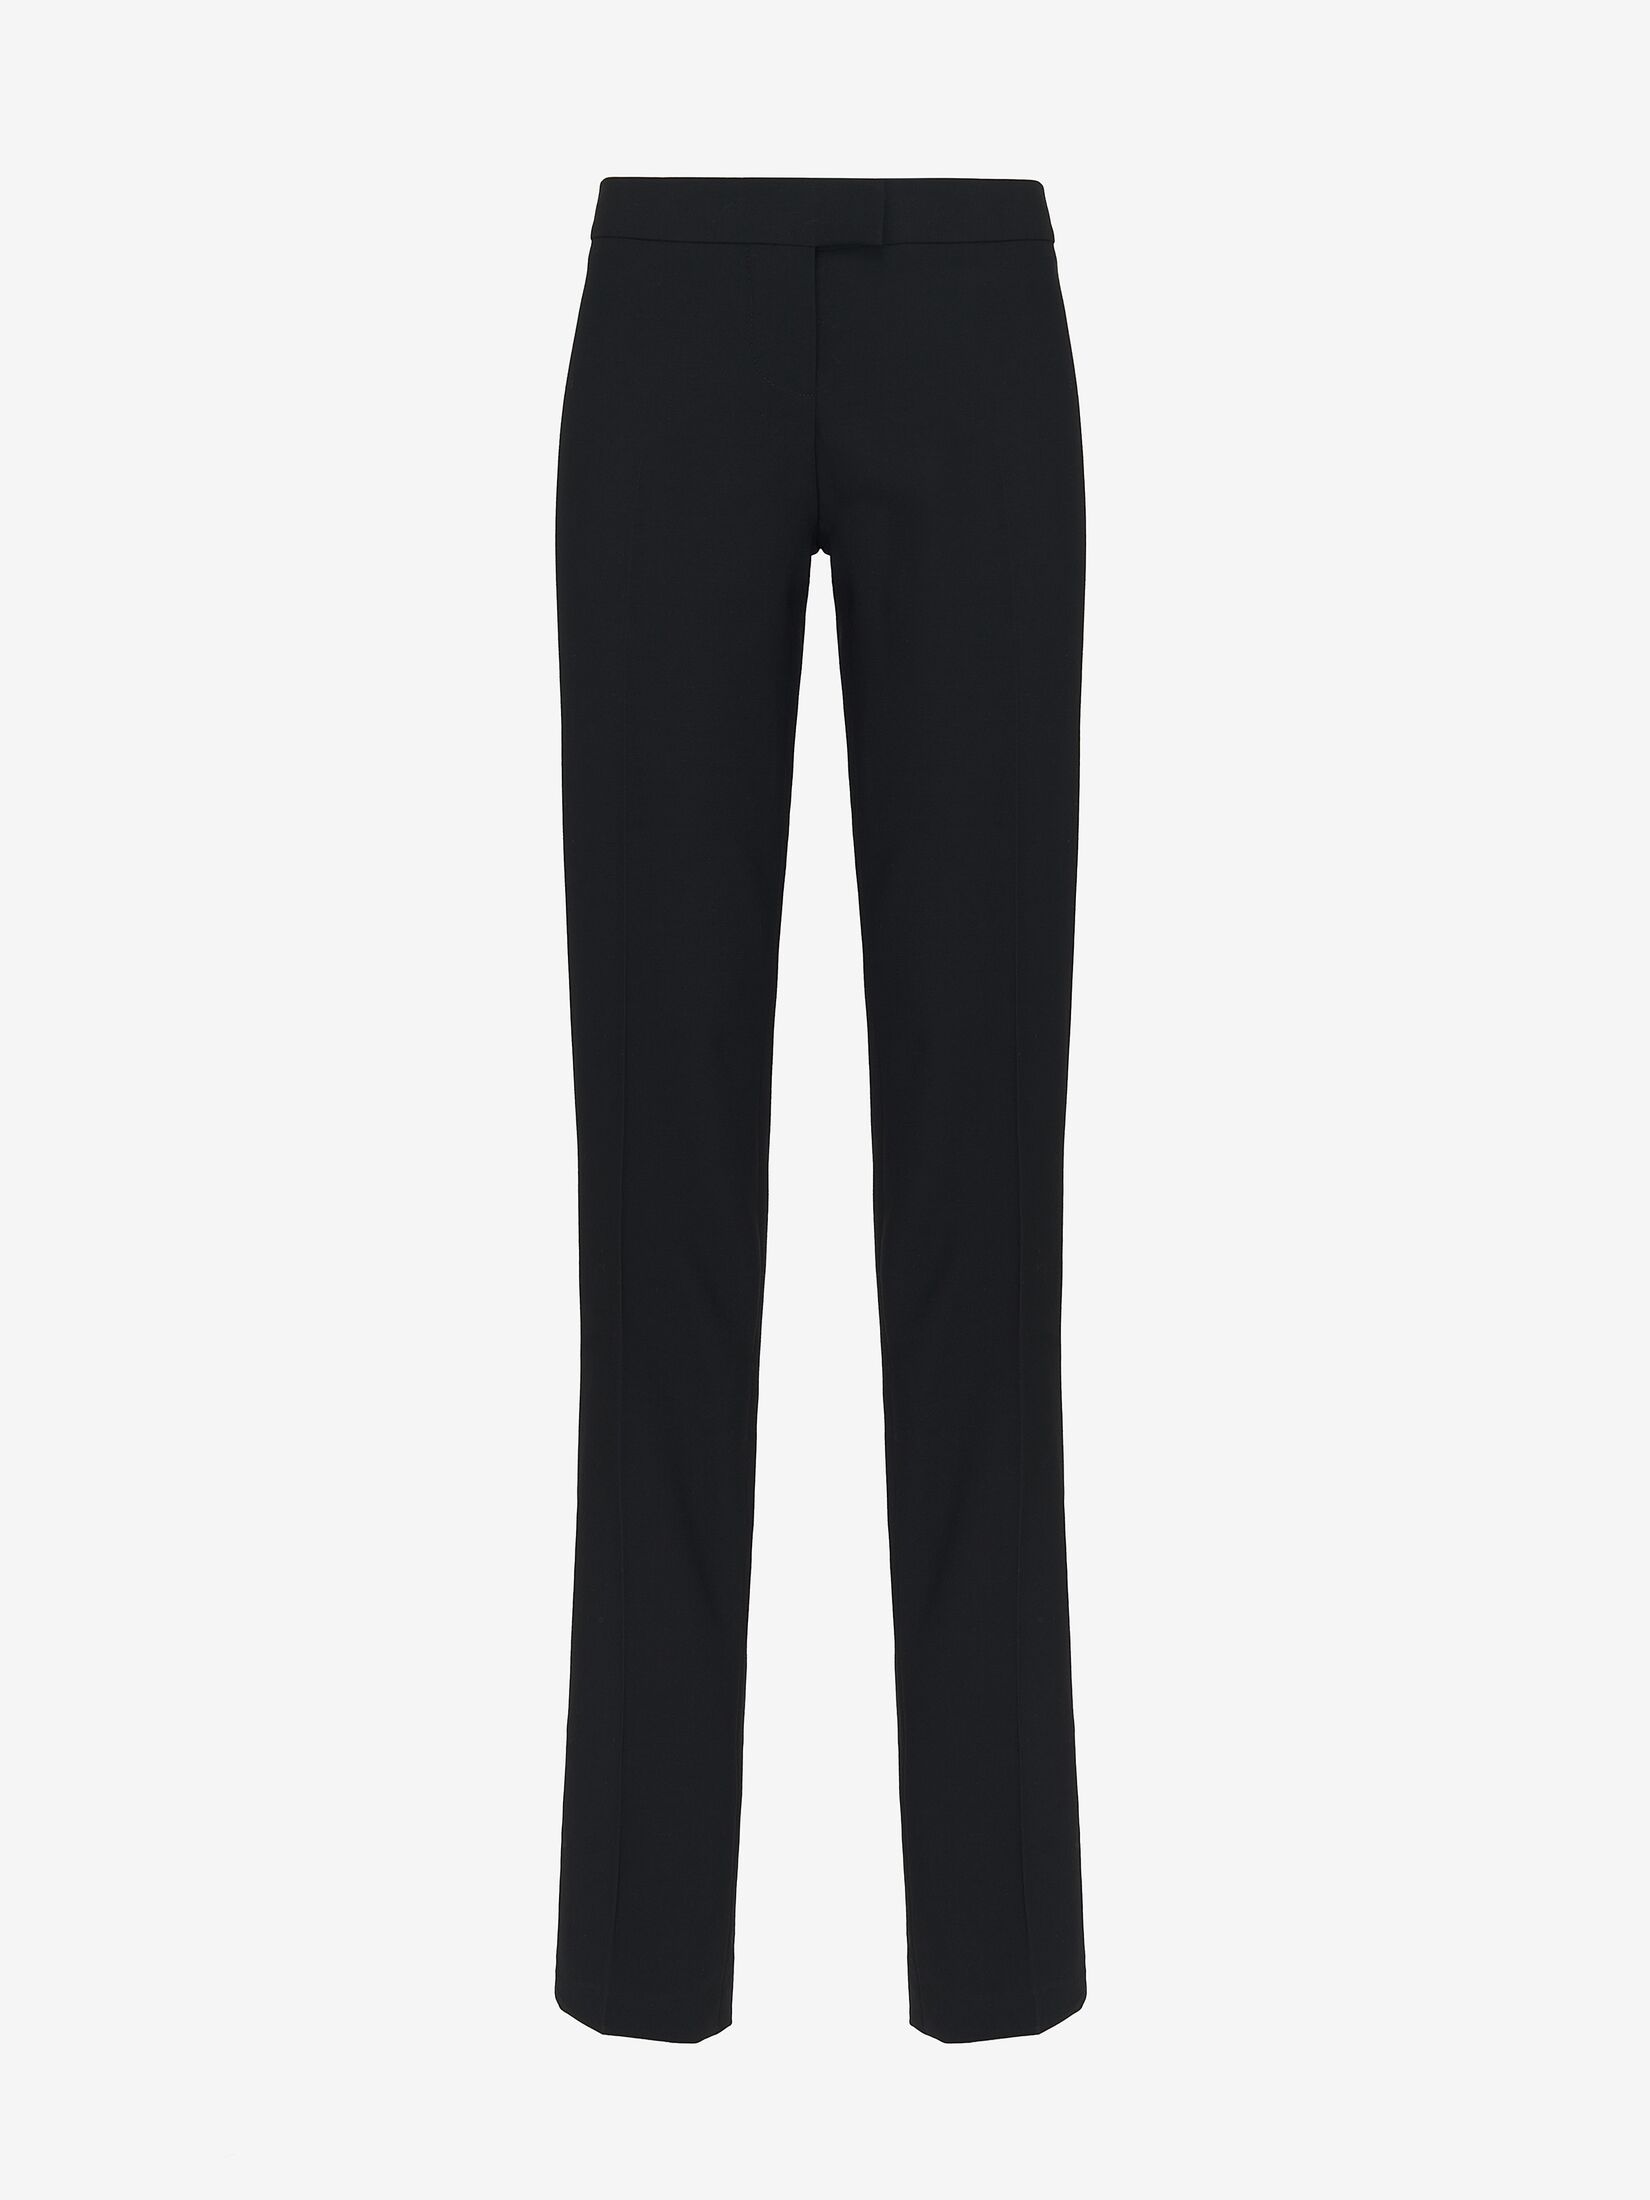 Low-waisted Straight Leg Trousers